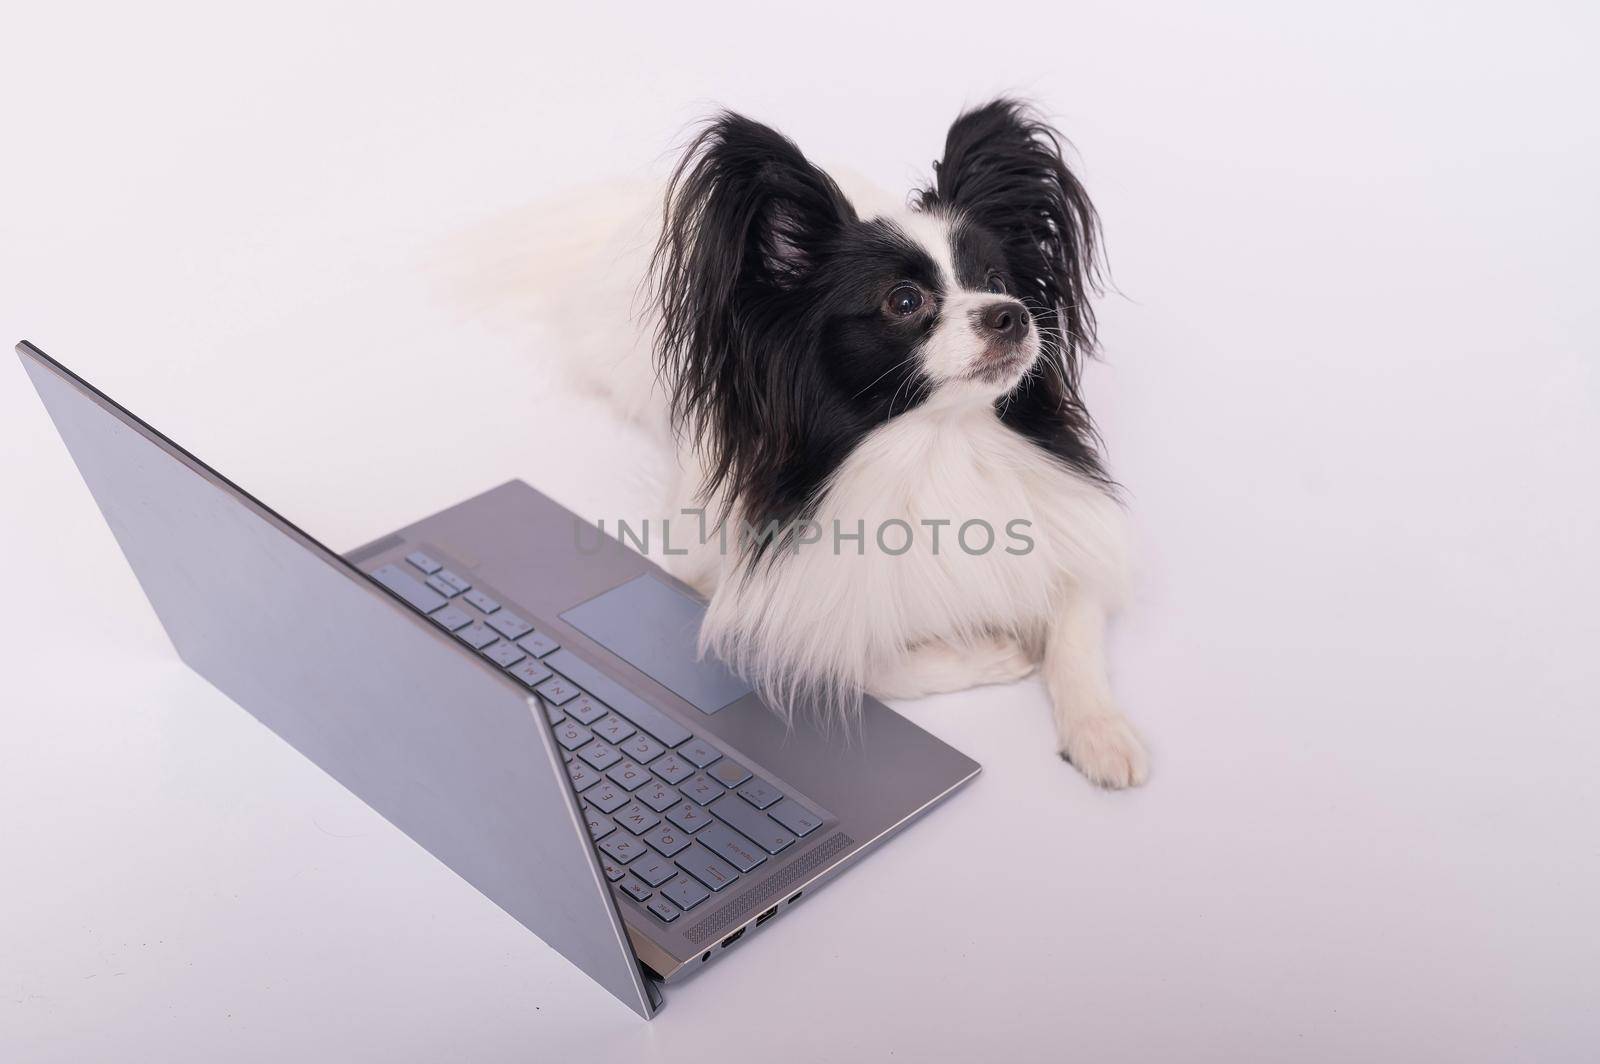 Smart dog papillon breed works at a laptop on a white background. Continental Spaniel uses a wireless computer. by mrwed54